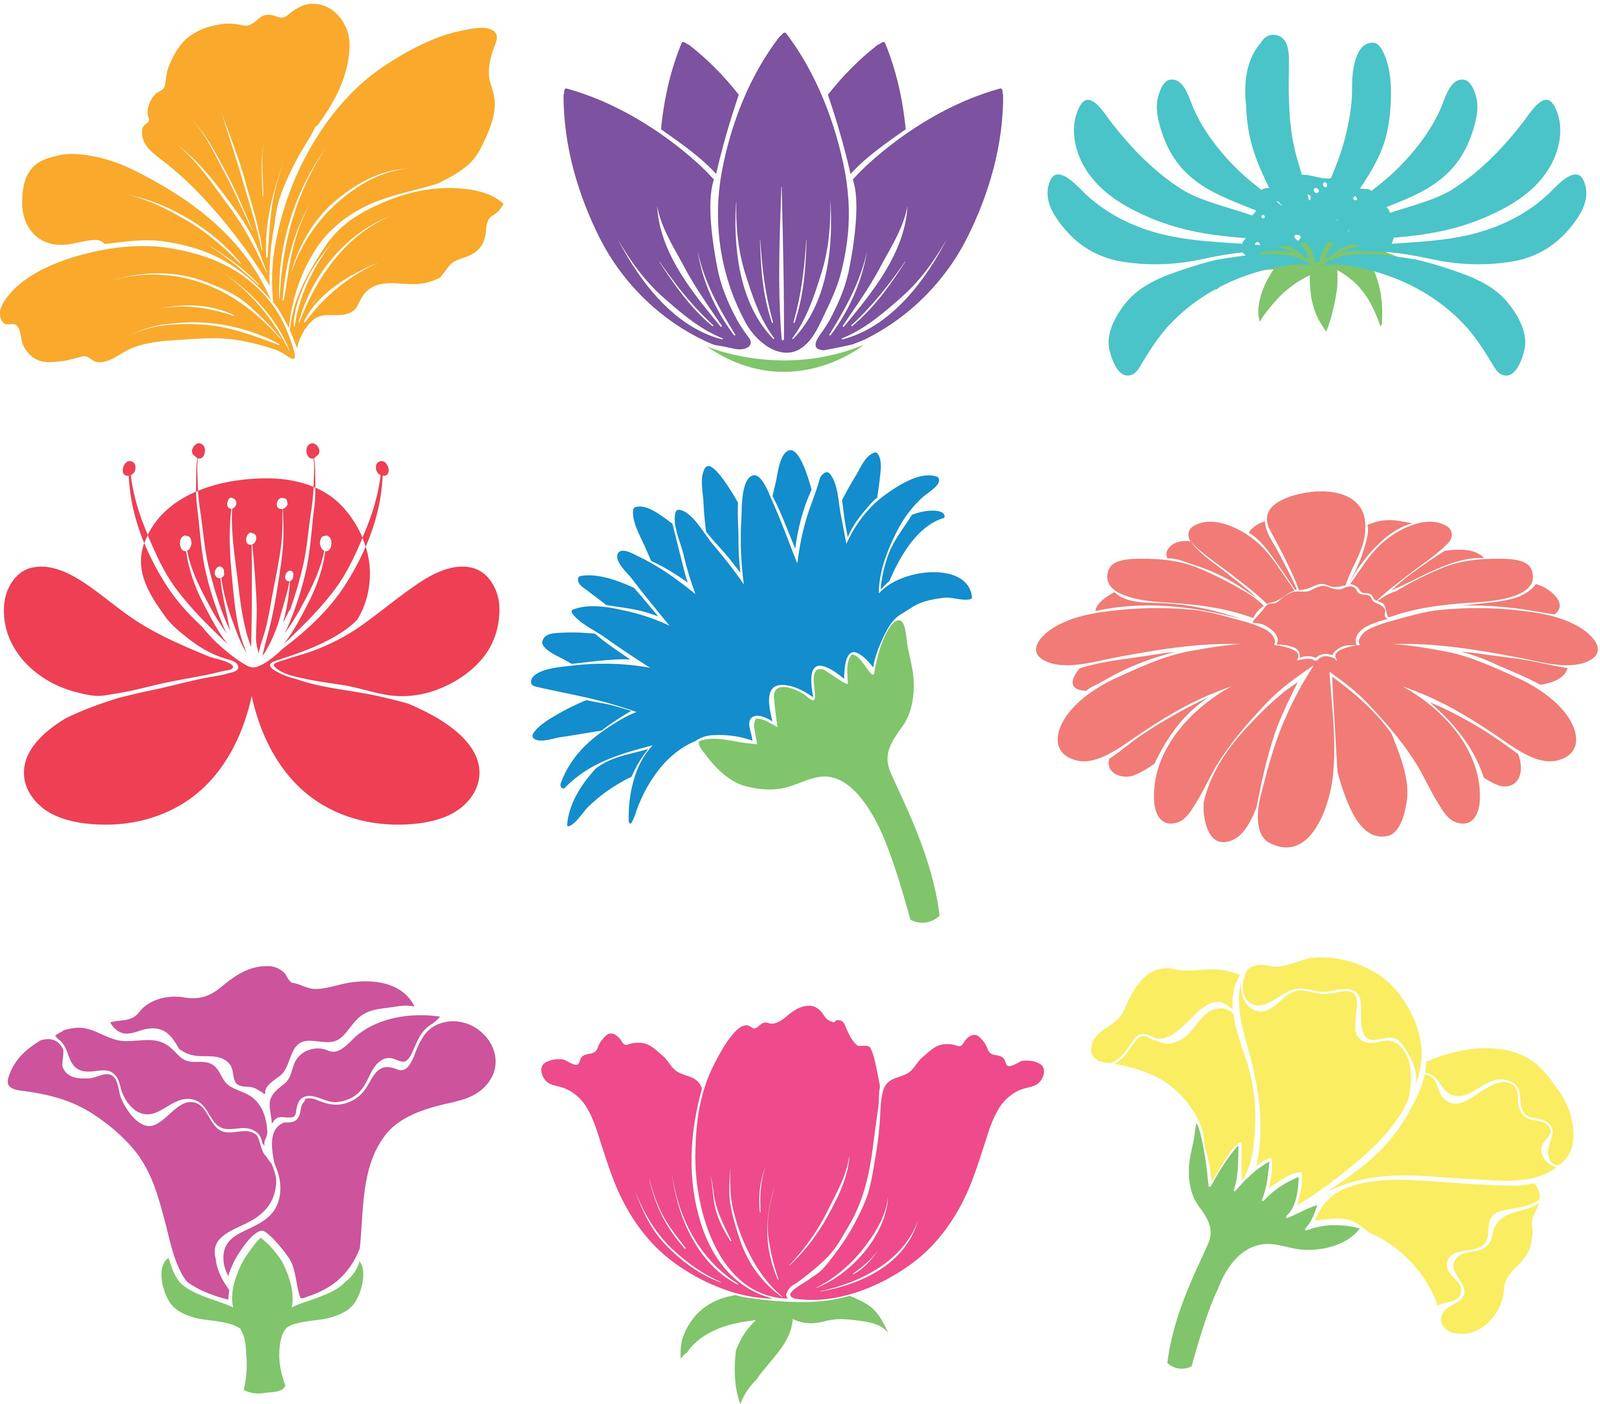 Colourful floral artworks on a white background